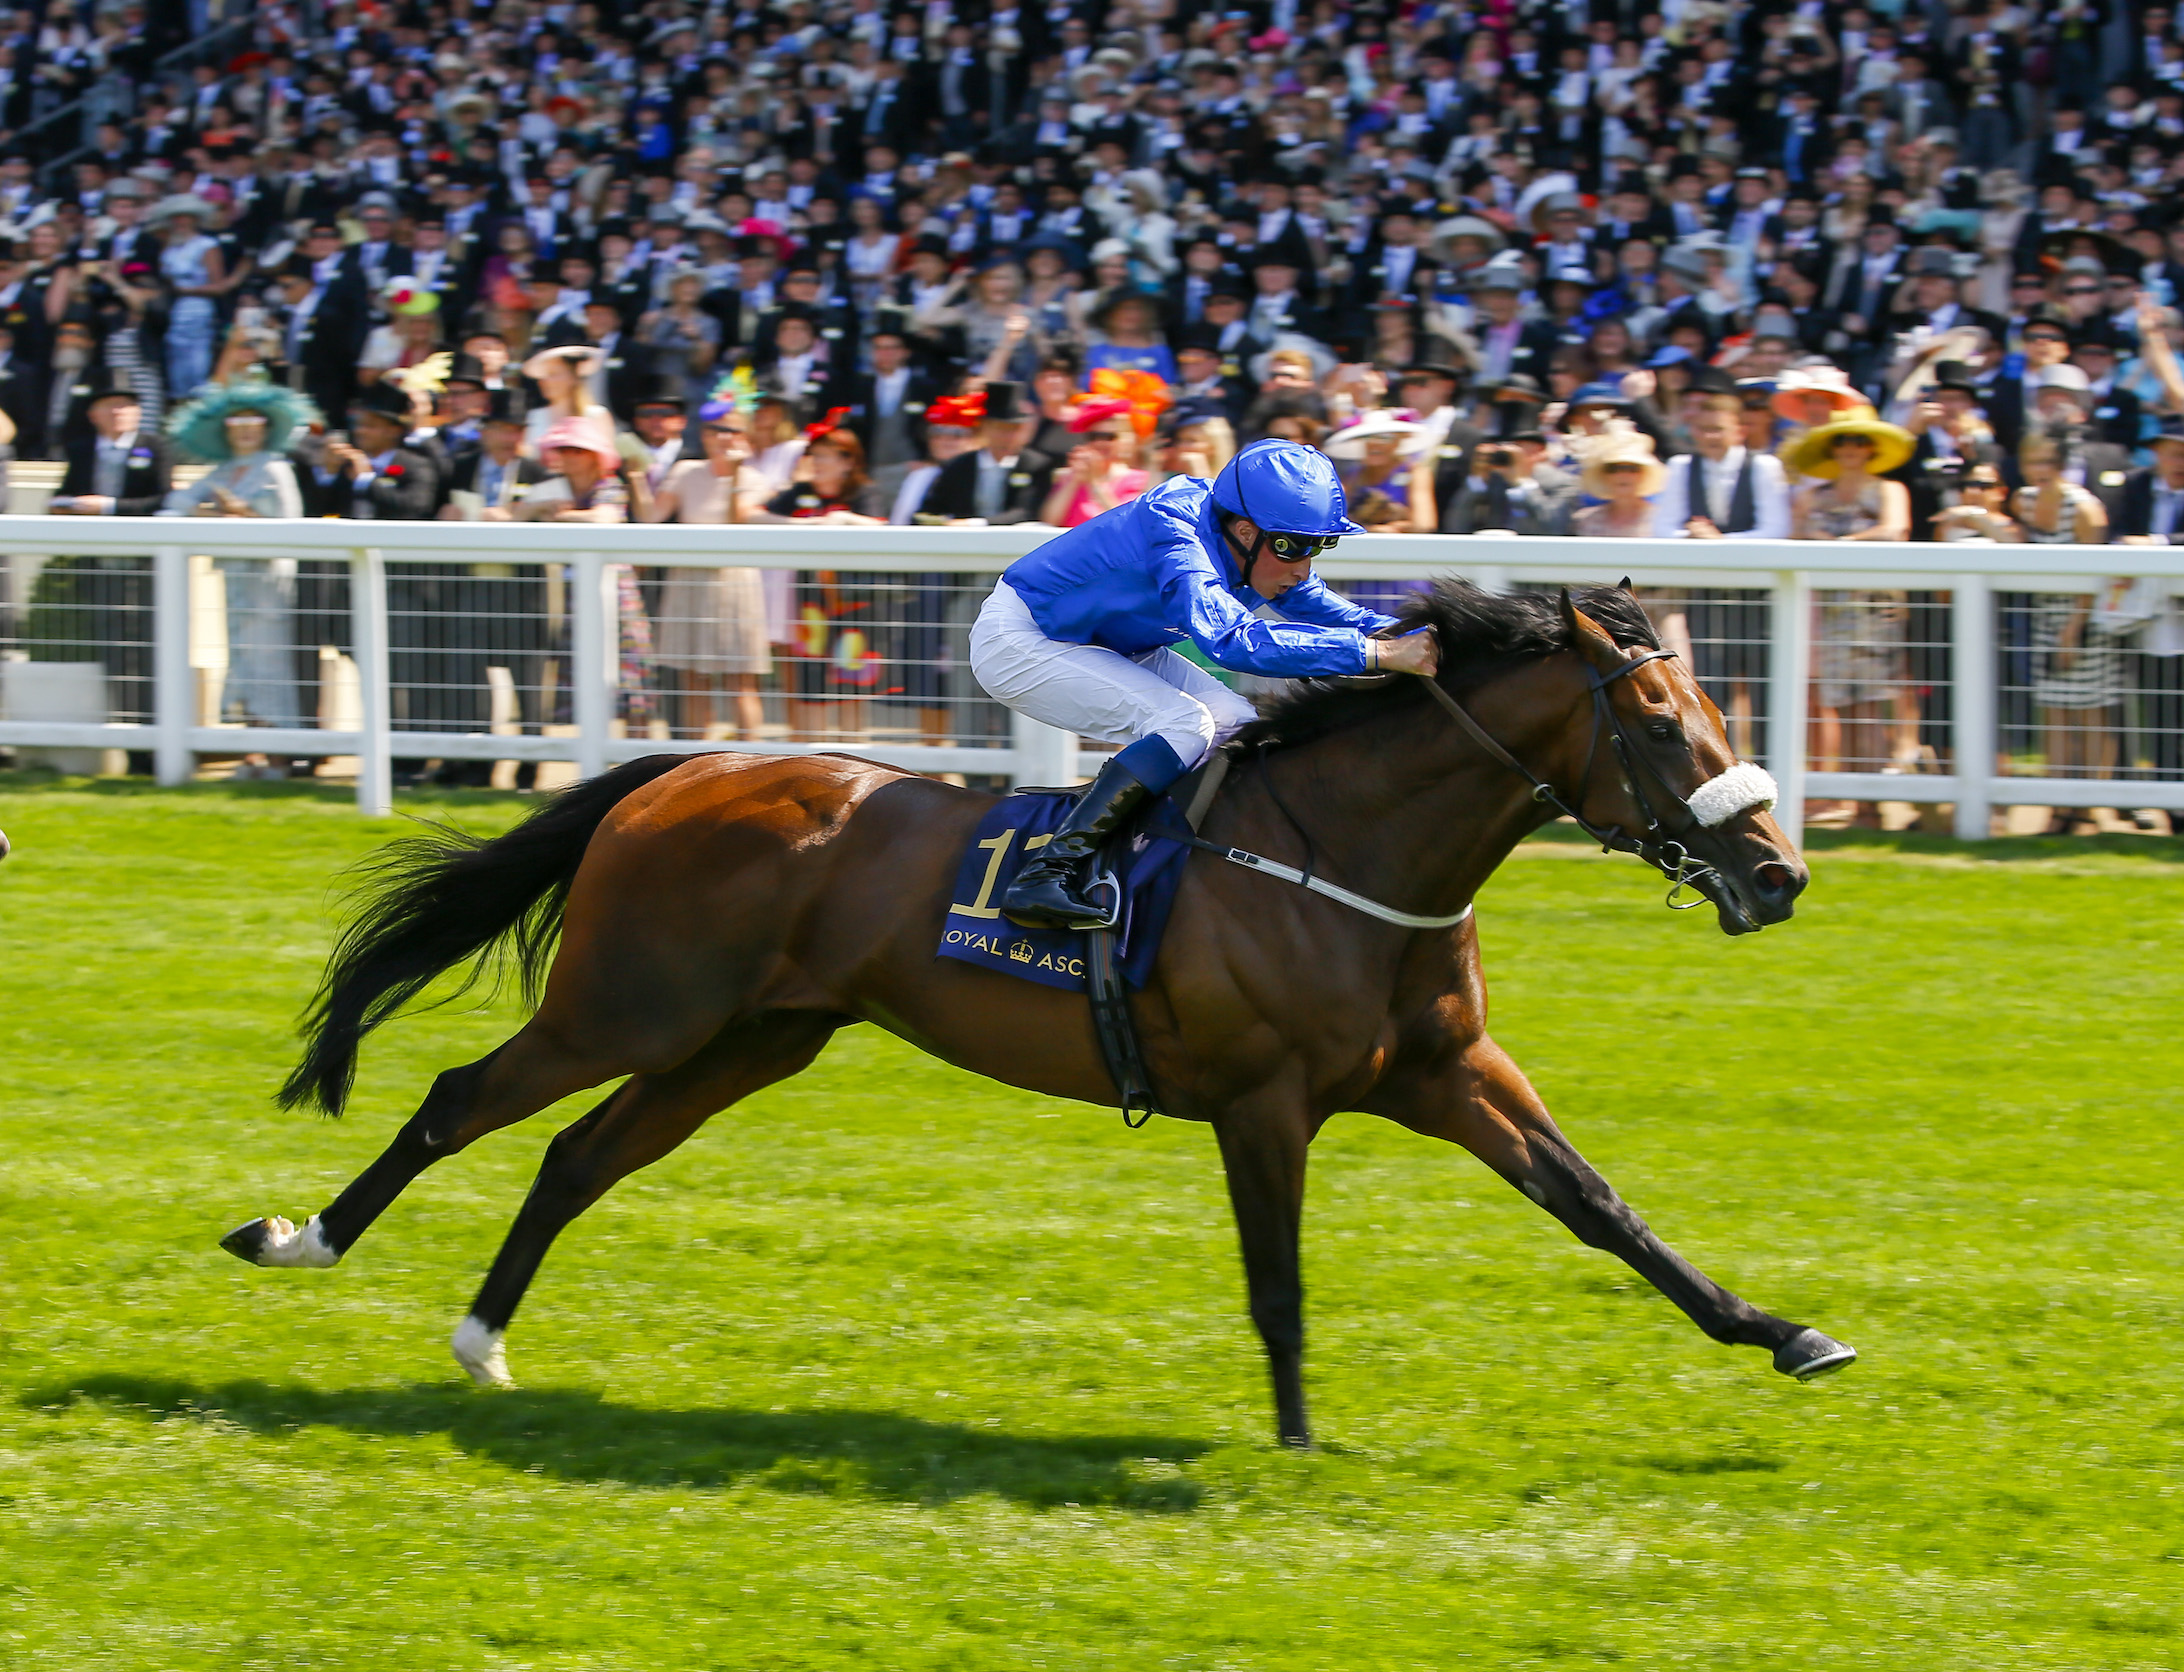 Champion miler Ribchester was sourced by Aidan O’Ryan and Richard Fahey at the Goffs Orby Sale. Photo: Mark Cranham